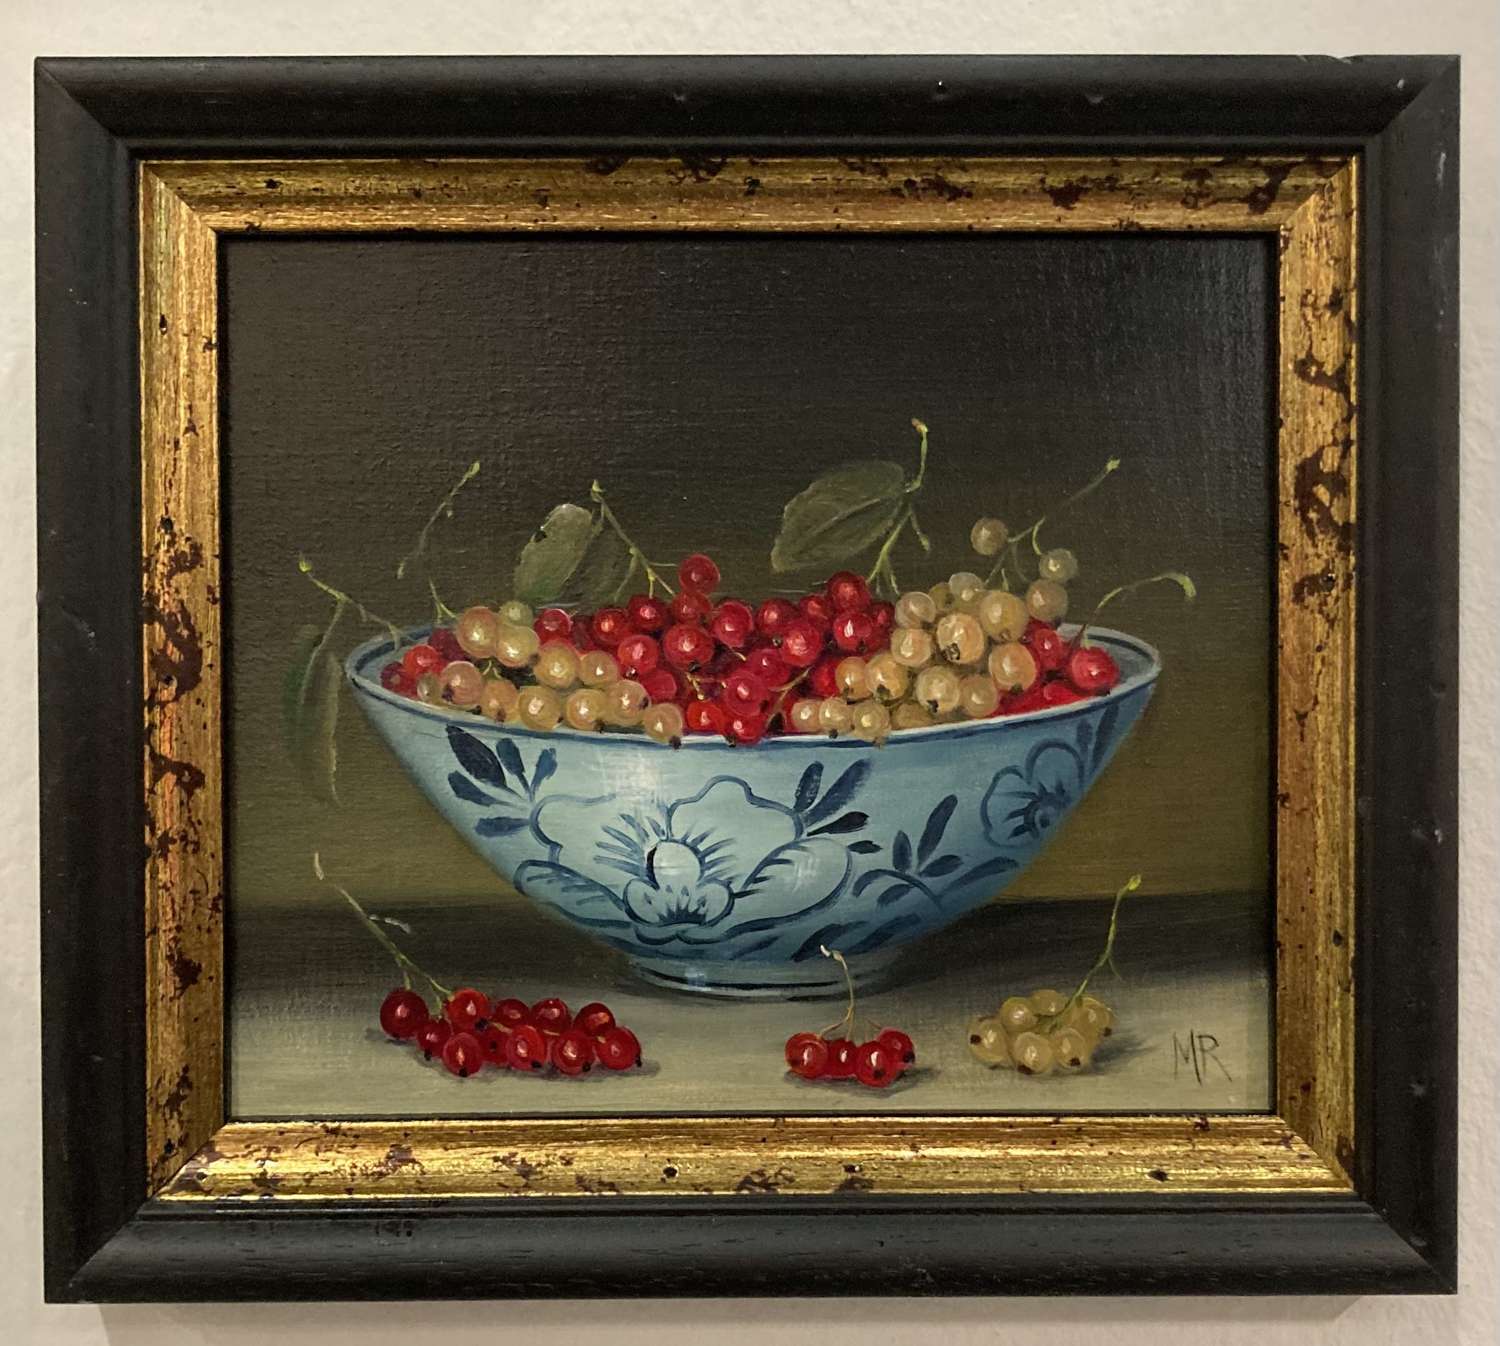 Red and white currants